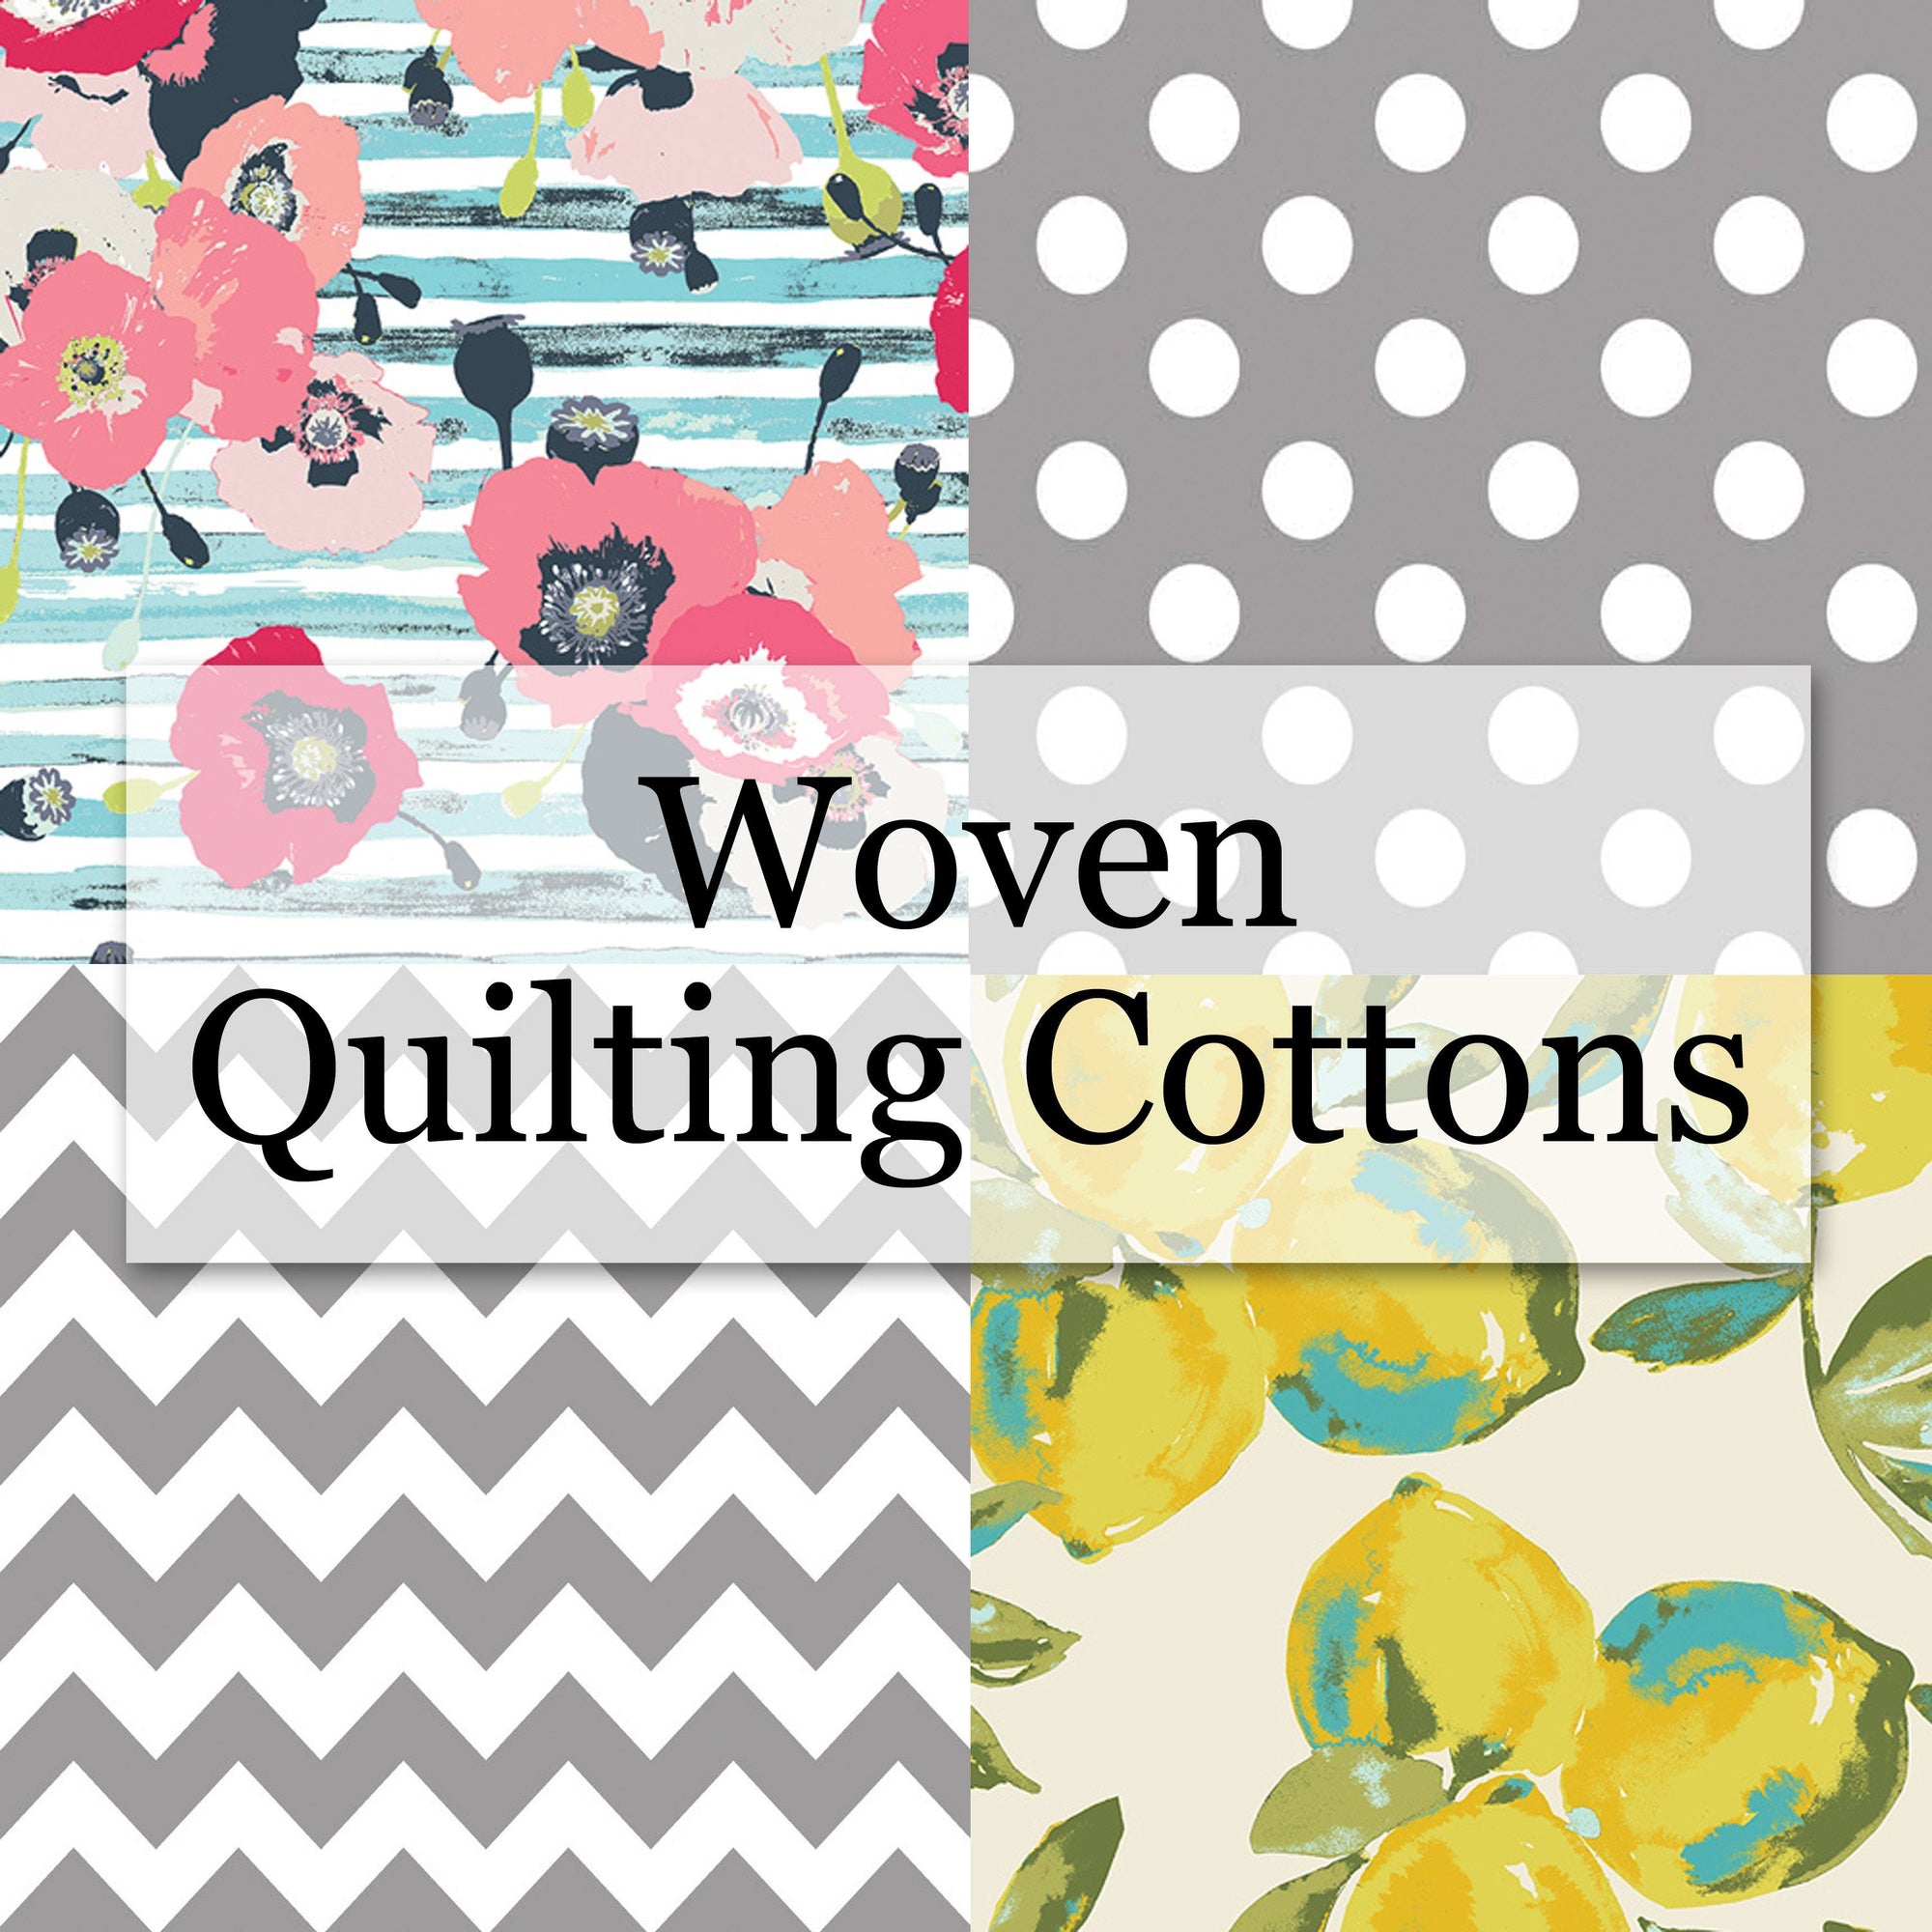 Woven Quilting Cottons